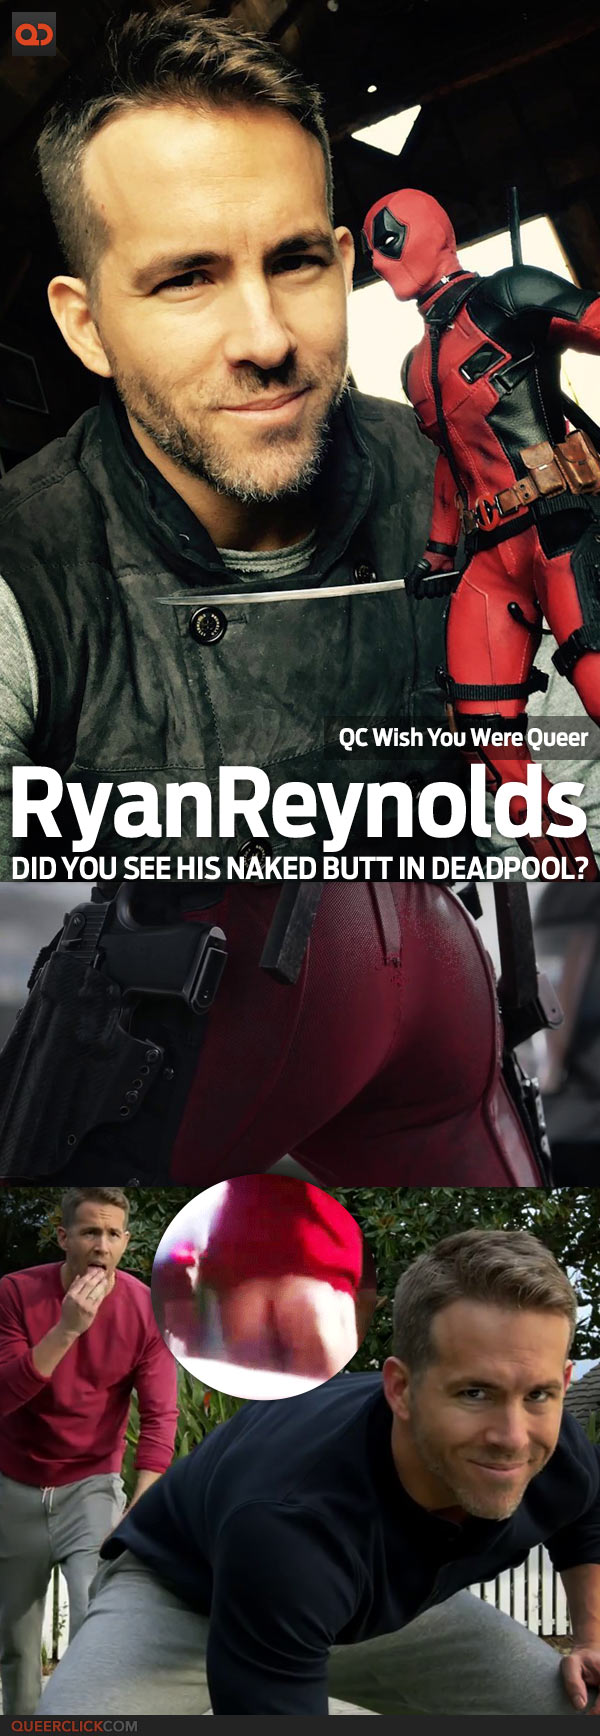 QC's Wish You Were Queer: Ryan Reynolds - Did You See His Naked Butt On Deadpool?